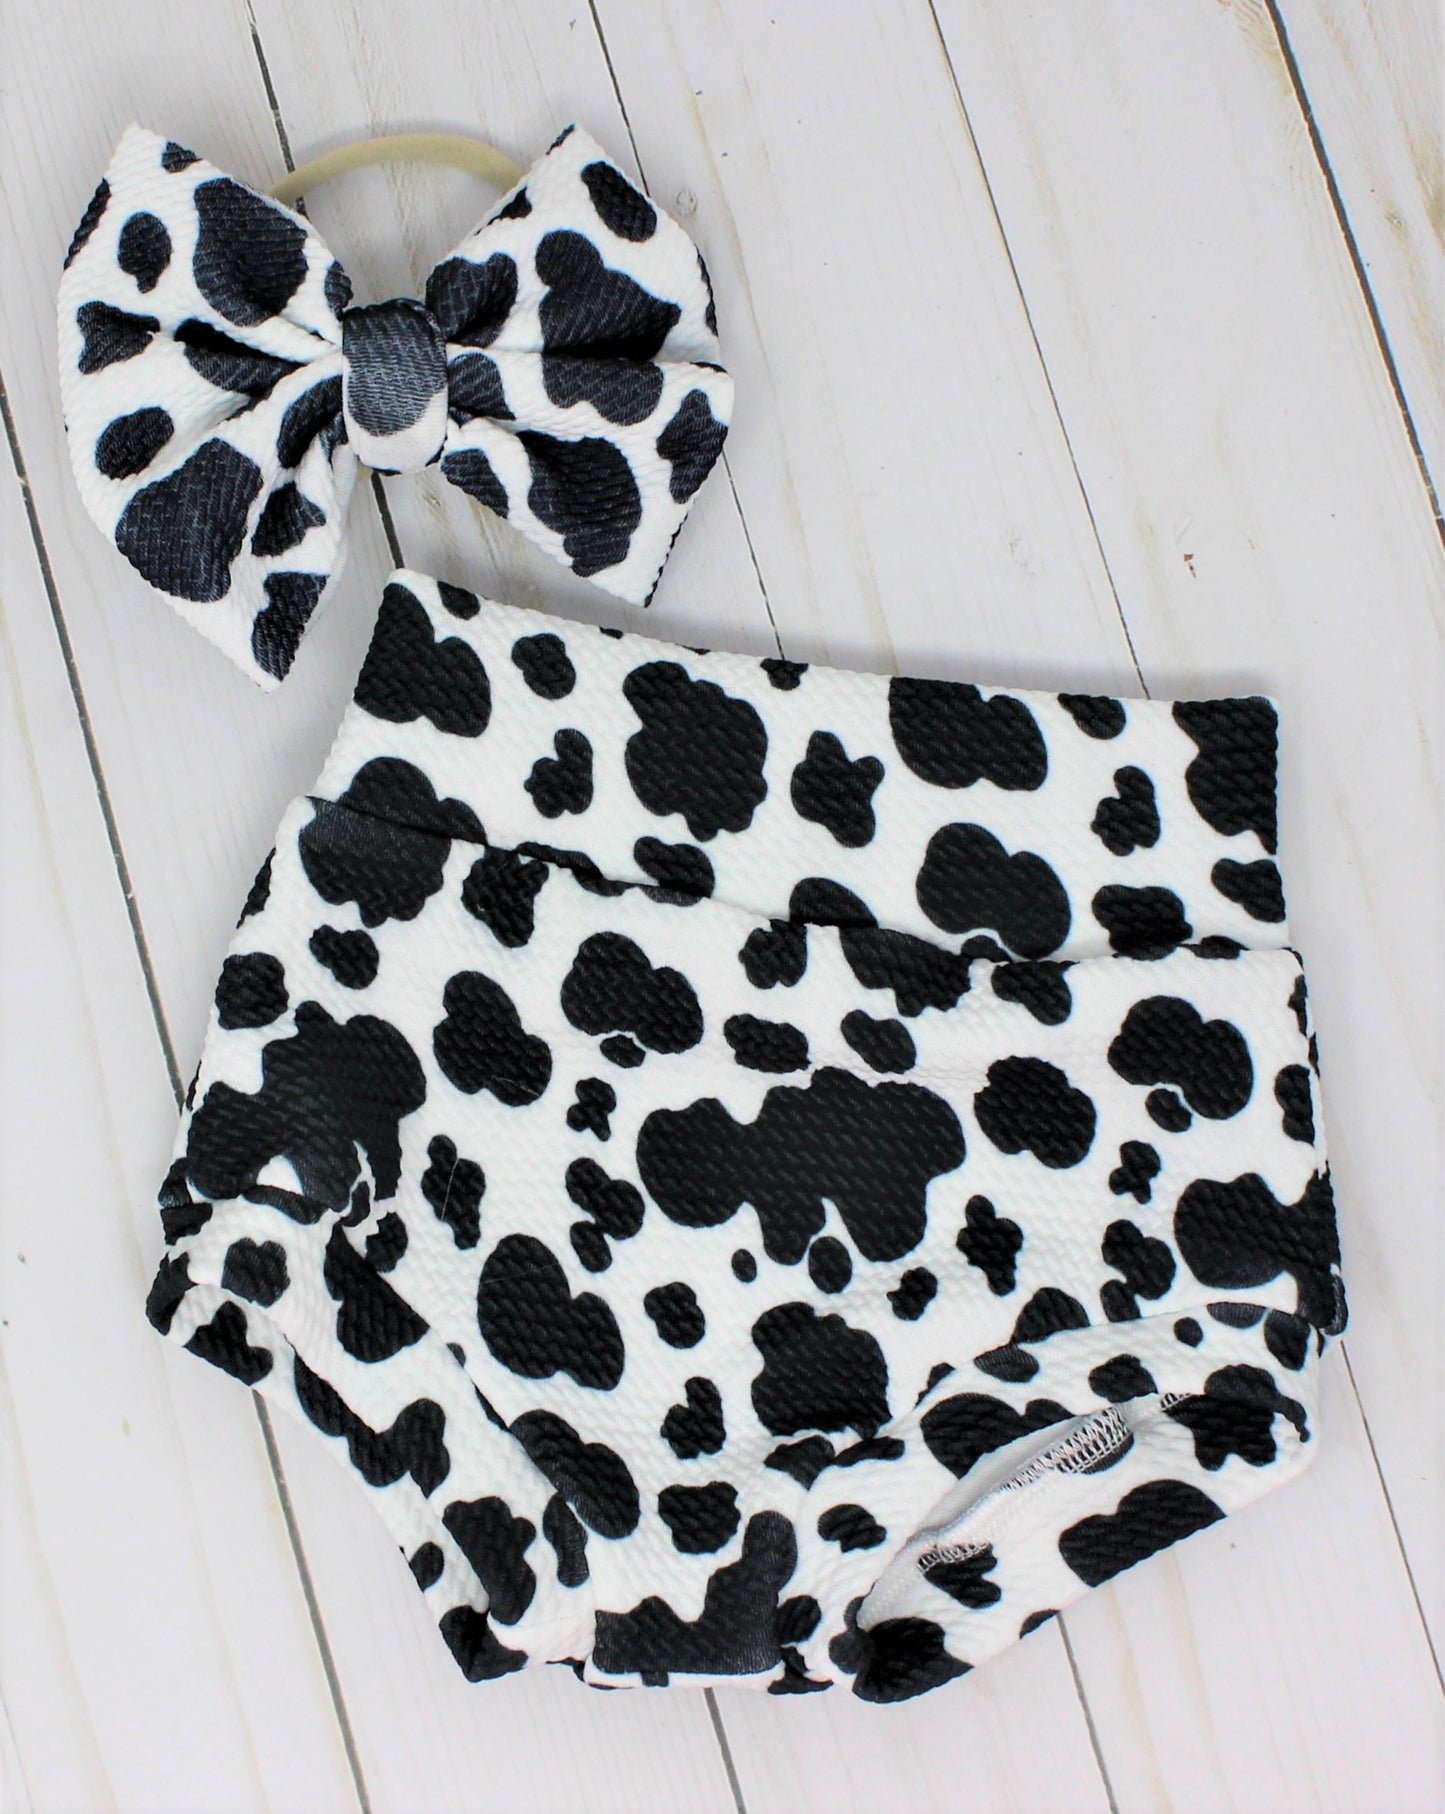 1/2 Way to A 12- Count Chick Fil A Onesie, Bummies and Bow Set